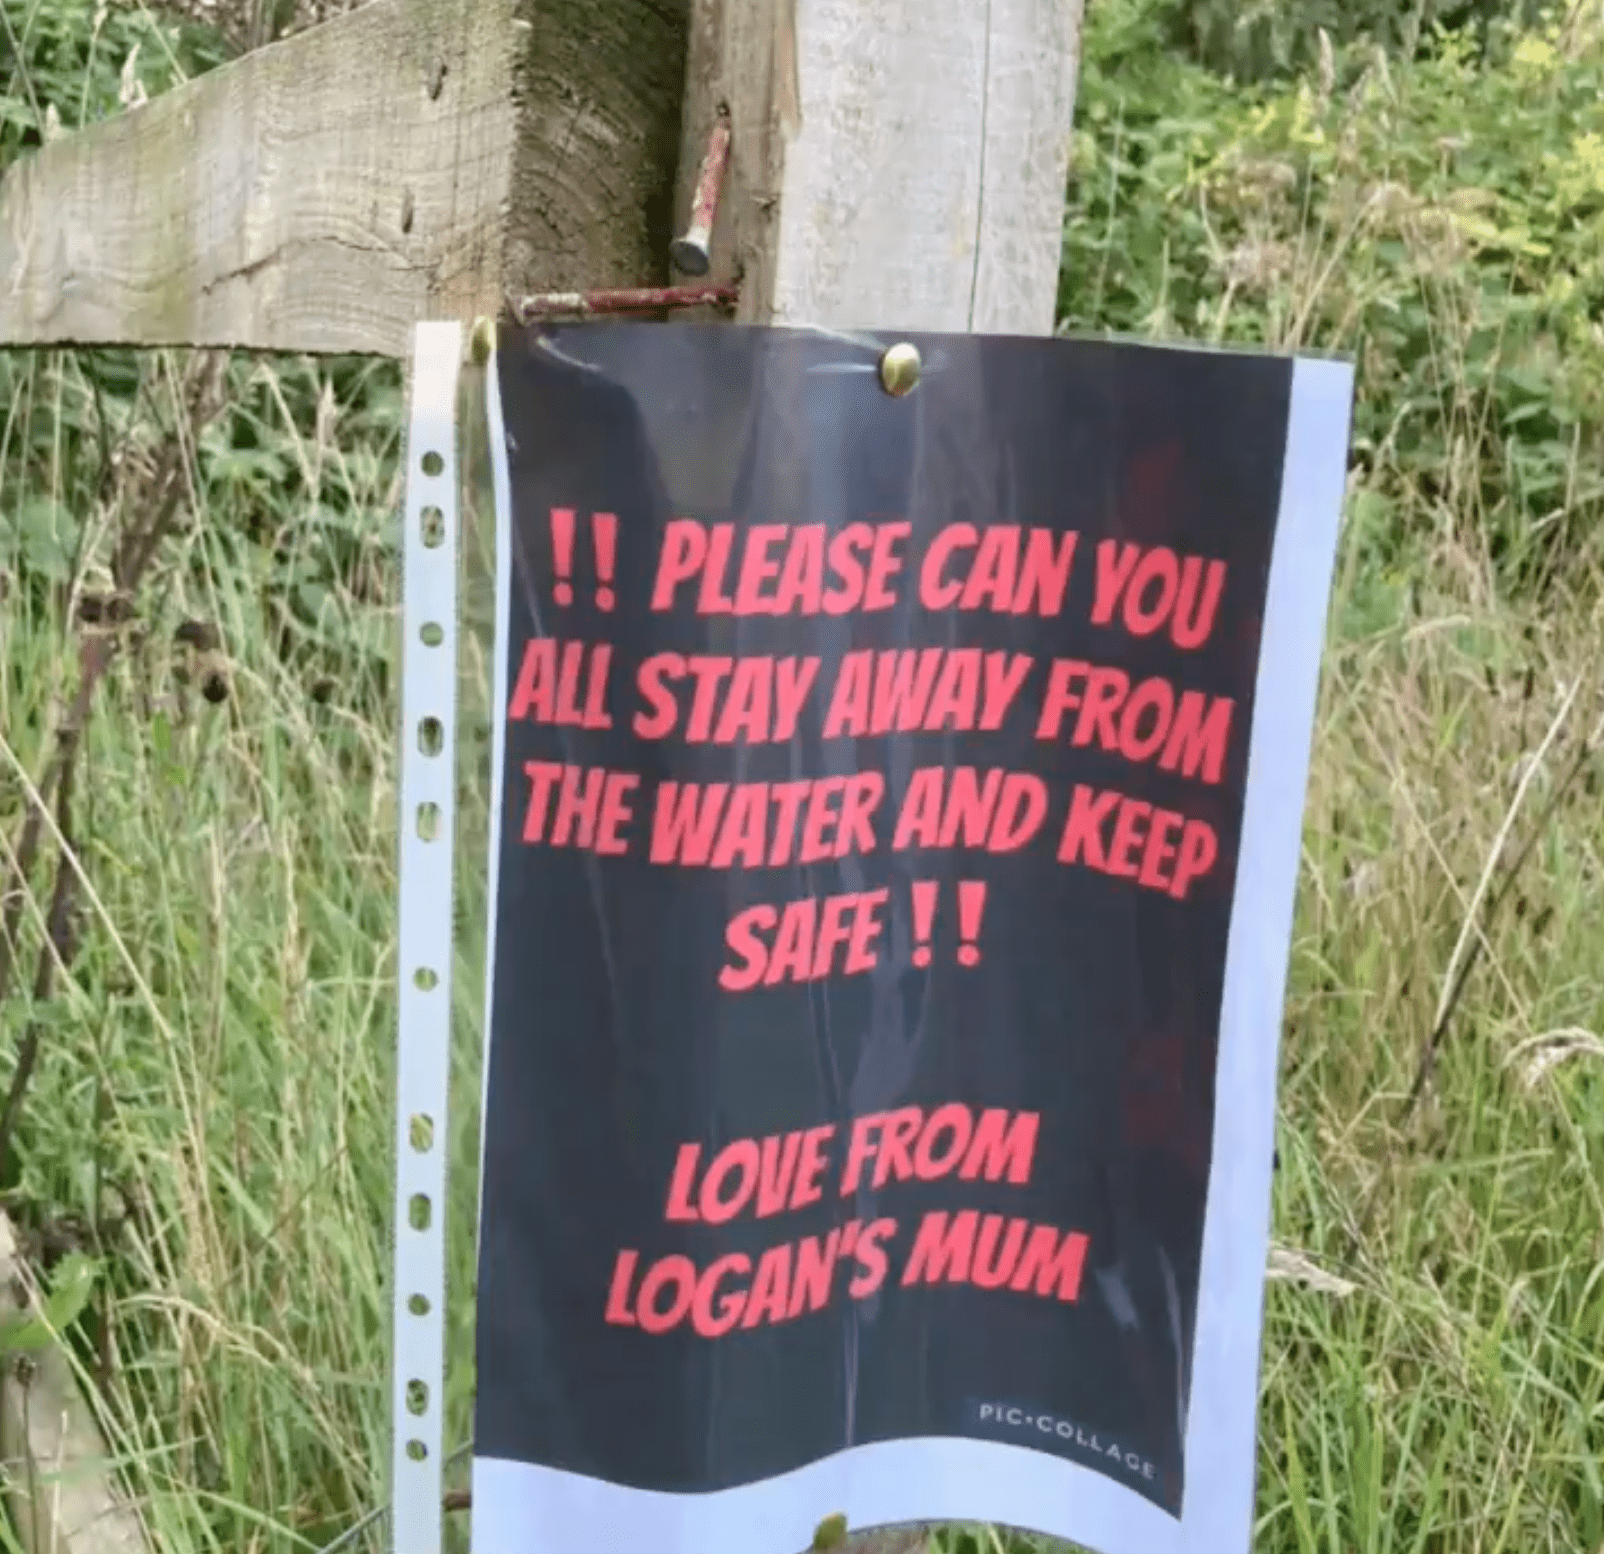 A poster next to dangerous canal warns people to stay away from the water | Photo: Twitter/GHR_Derbyshire